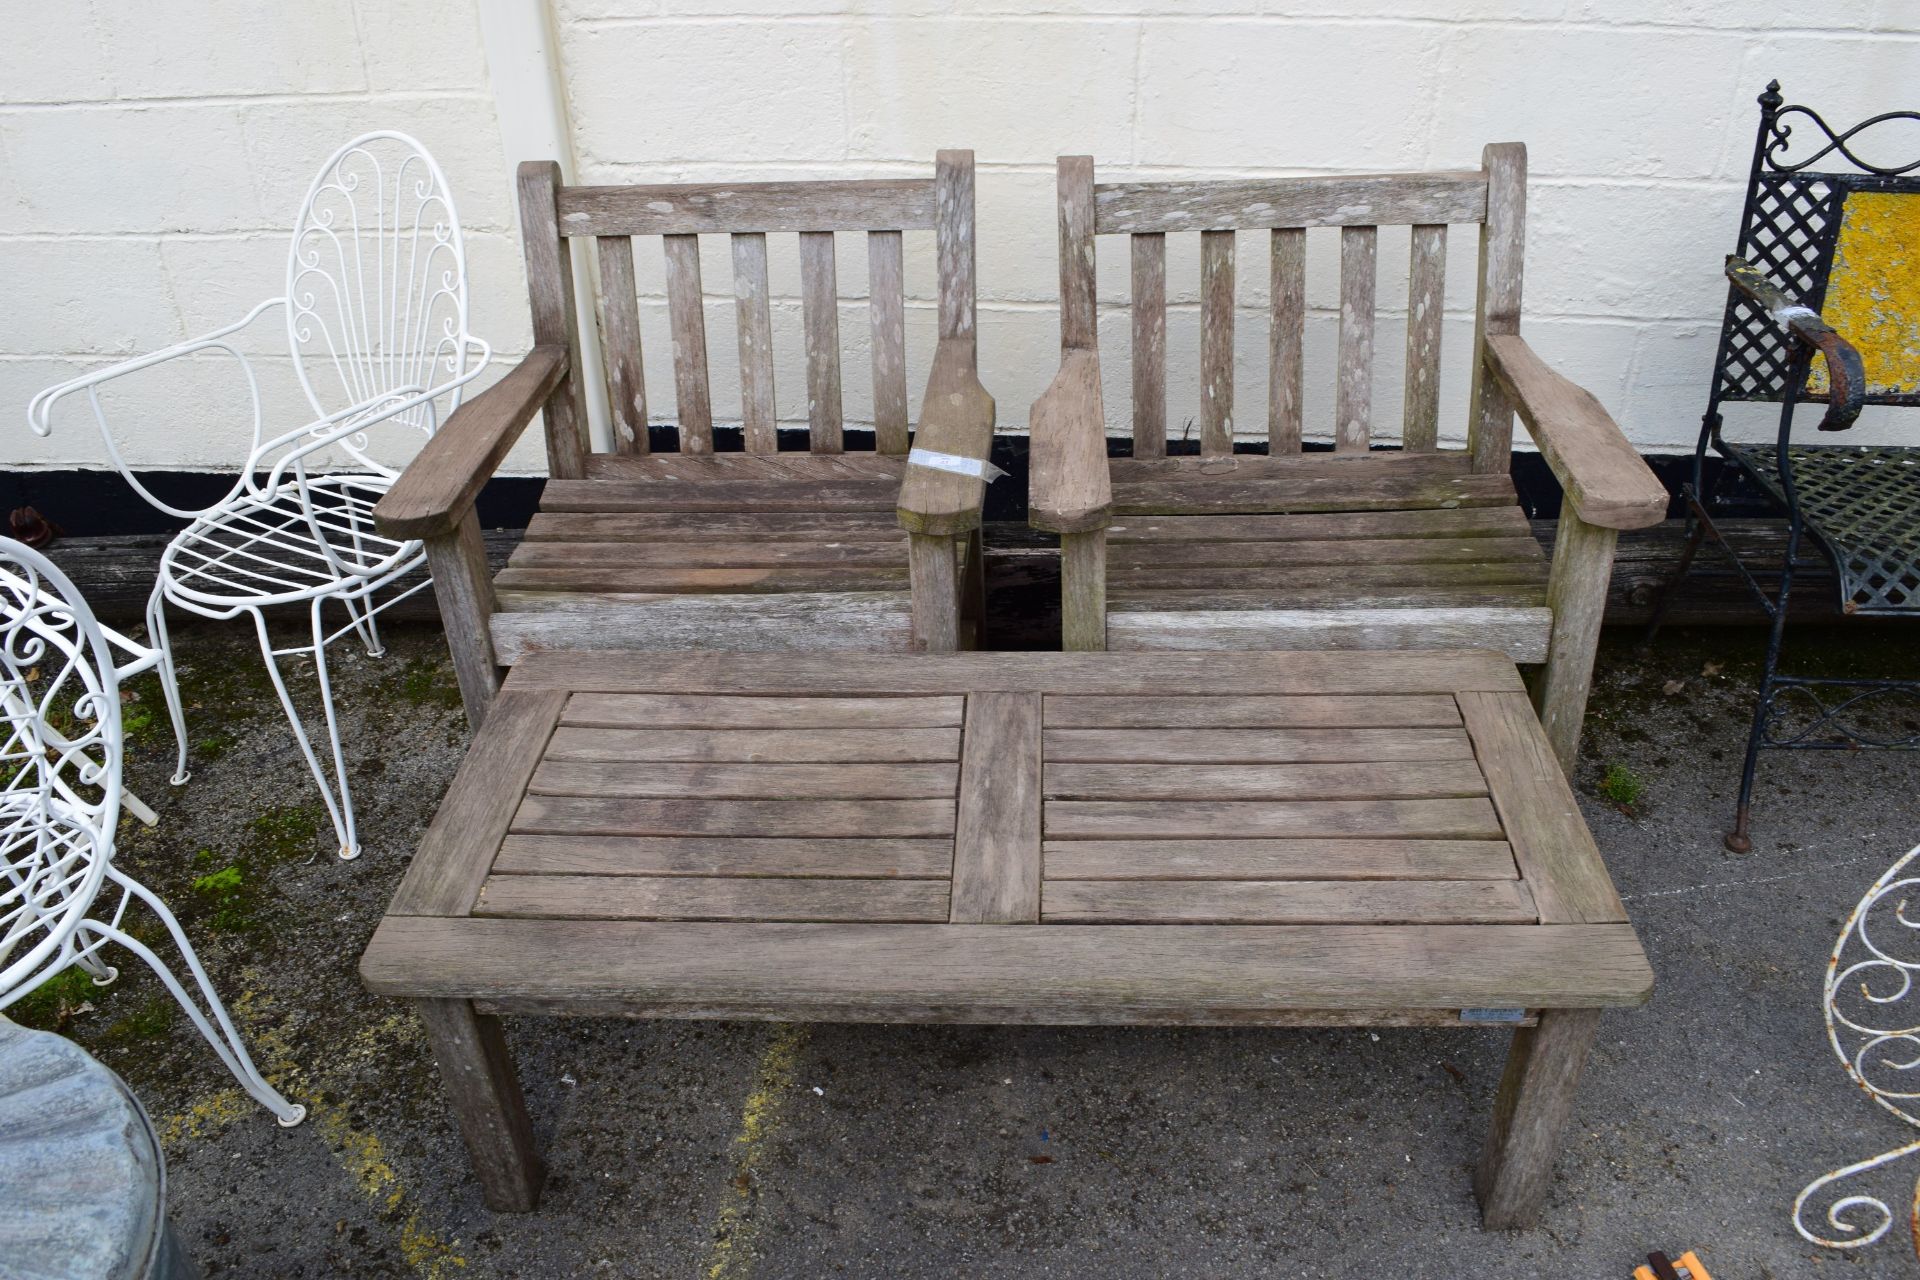 PAIR OF WOODEN GARDEN SEATS WITH A COFFEE TABLE